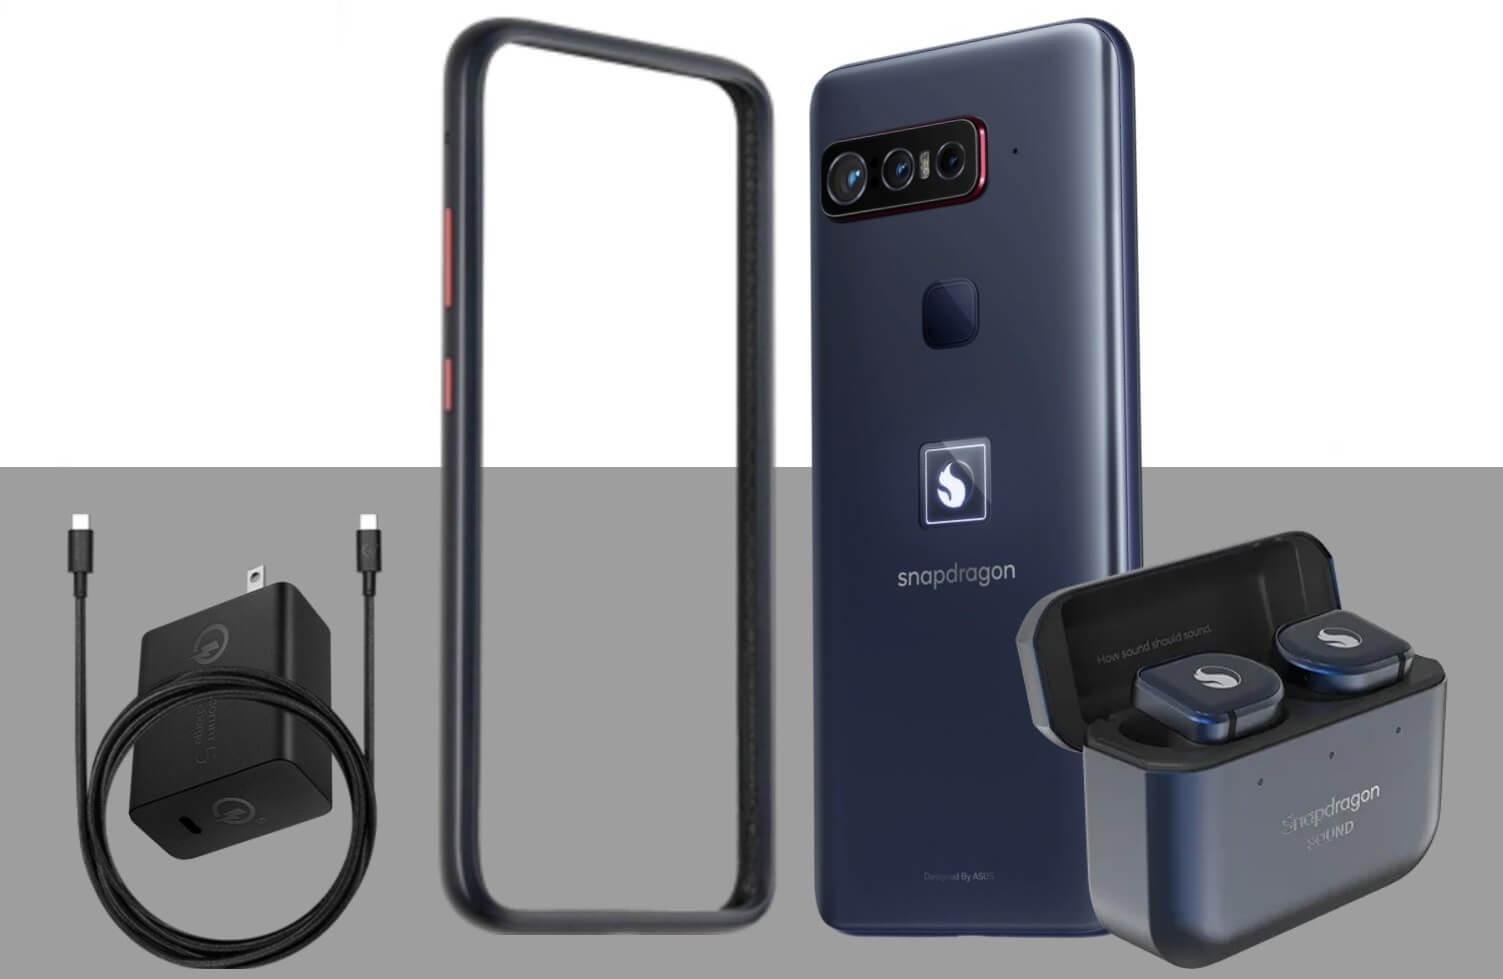 Snapdragon Insiders smartphone accessories